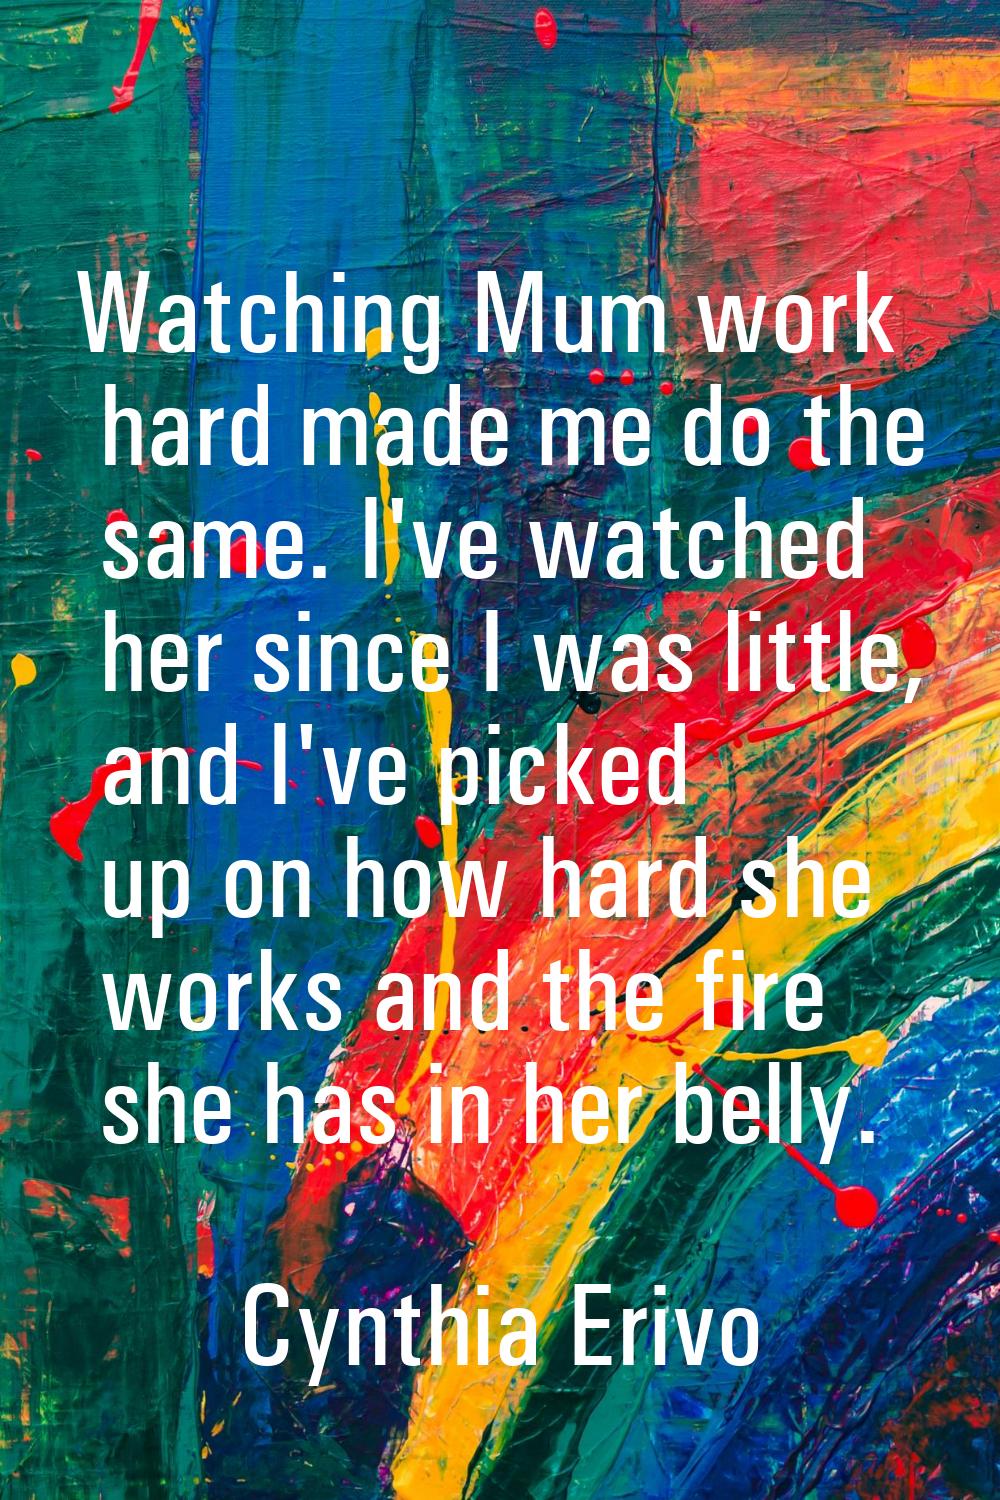 Watching Mum work hard made me do the same. I've watched her since I was little, and I've picked up